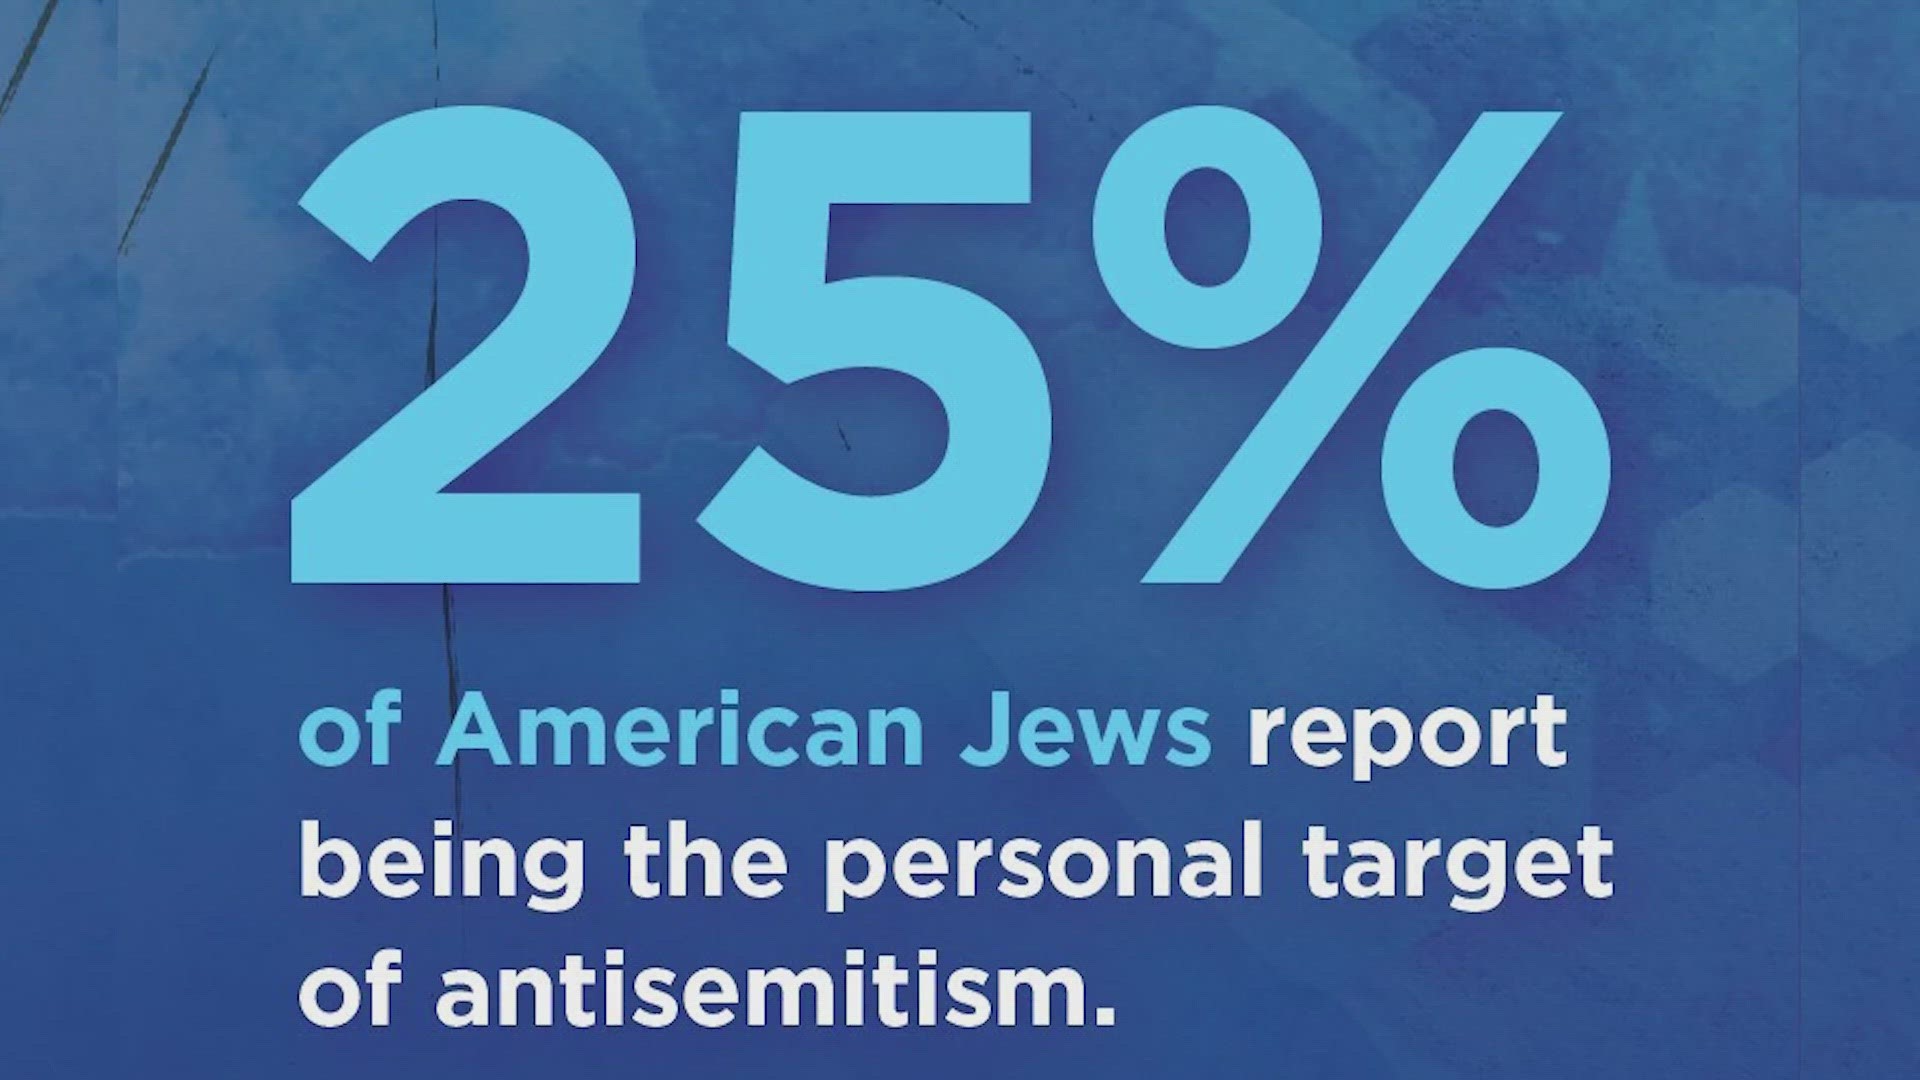 'The State of Antisemitism in America 2023' report found that 63% of American Jews say they feel less safe living in the United States than a year ago.